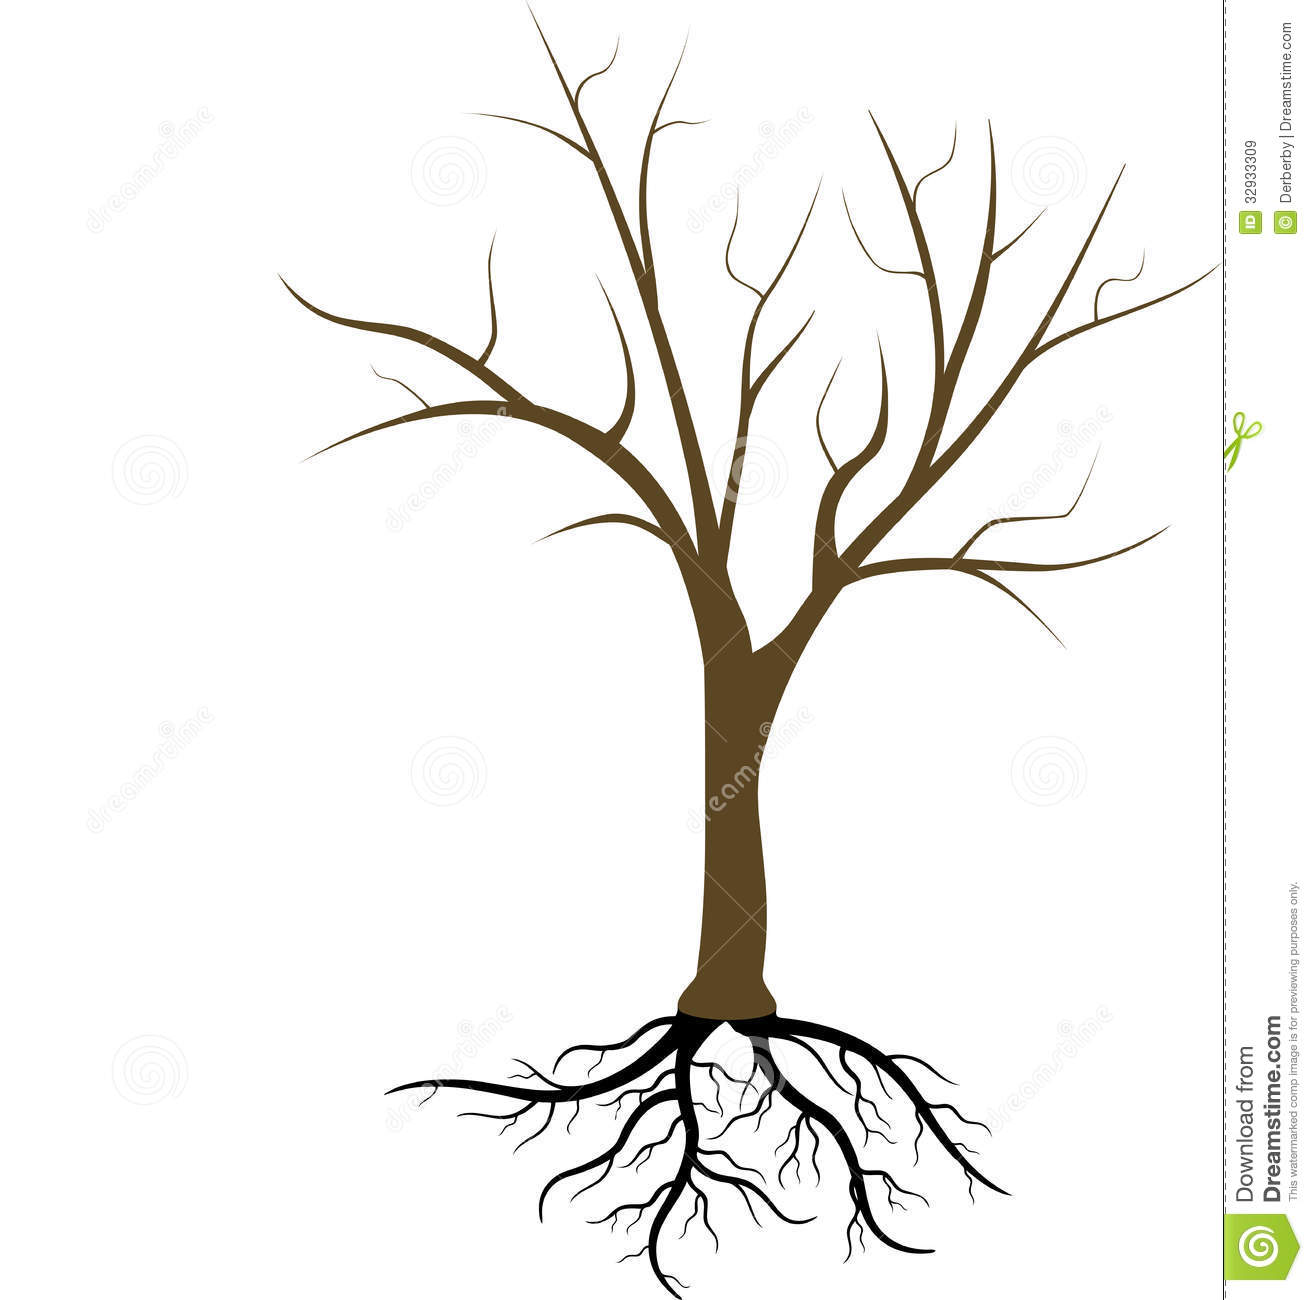 Tree Without Leaves Clipart.